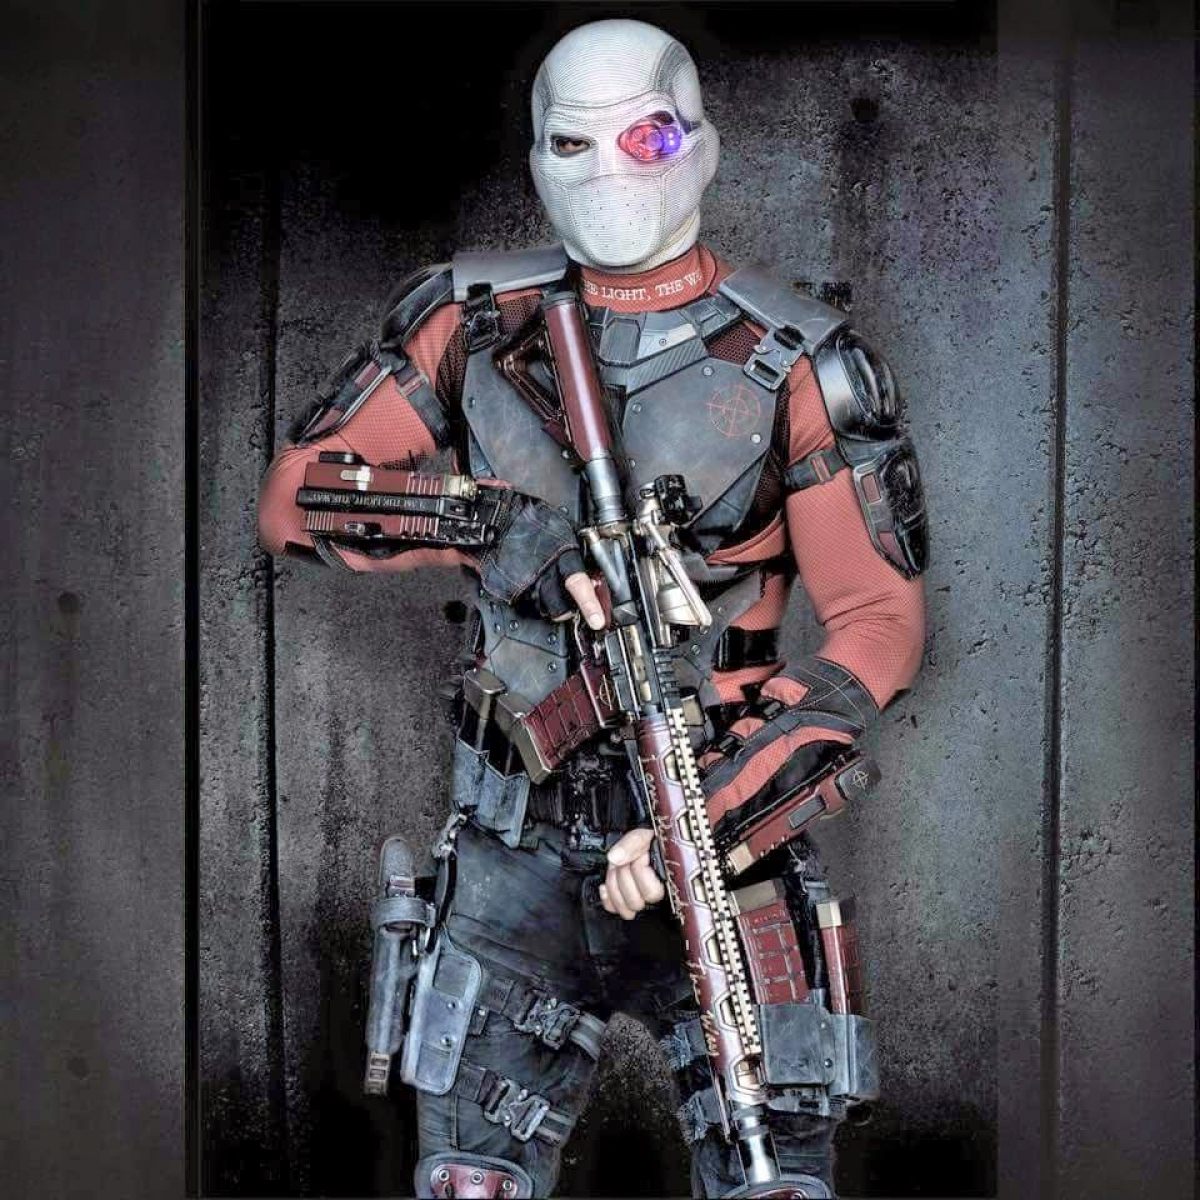 1080x1920  1080x1920 suicide squad movies deadshot for Iphone 6 7 8  wallpaper  Coolwallpapersme